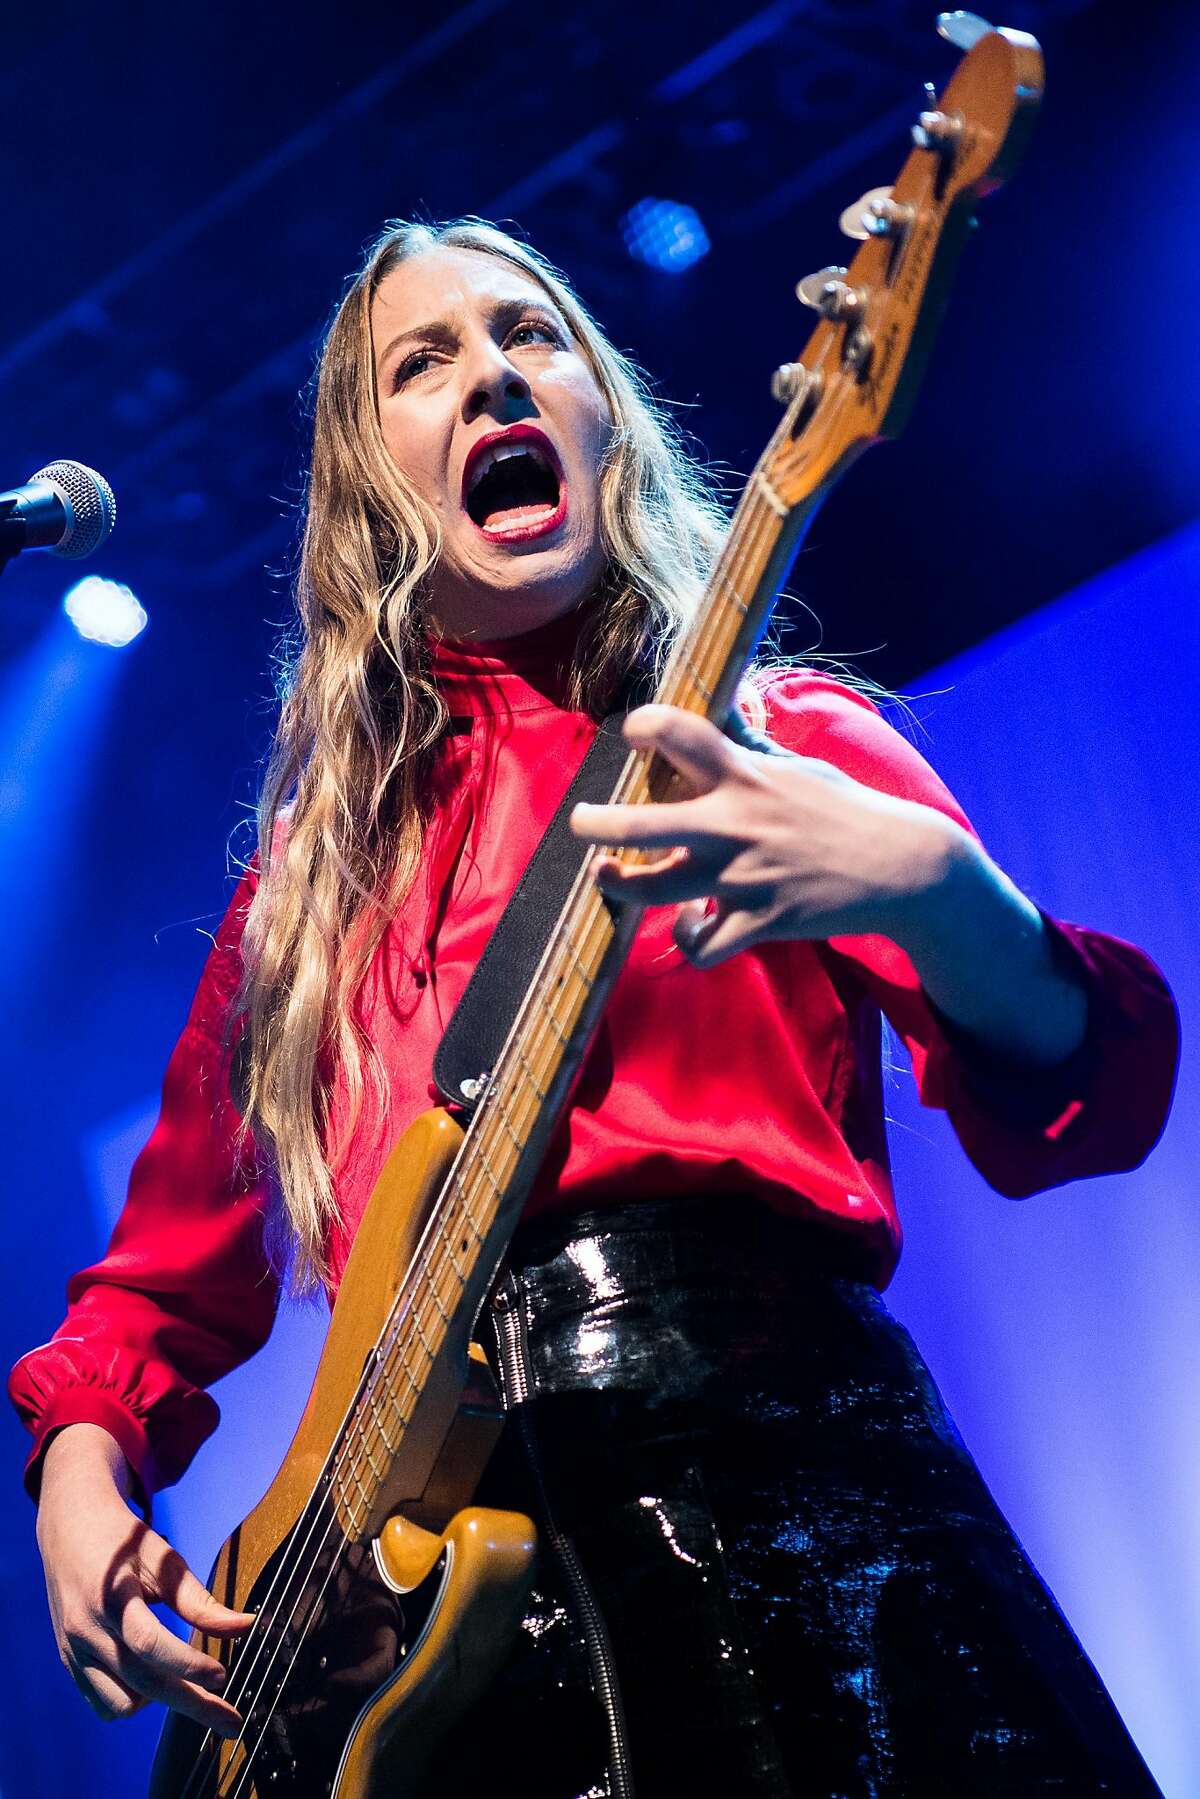 LOS ANGELES, CA - OCTOBER 19: Este Haim of HAIM performs onstage at The Greek Theatre on October 19, 2017 in Los Angeles, California. (Photo by Emma McIntyre/Getty Images)